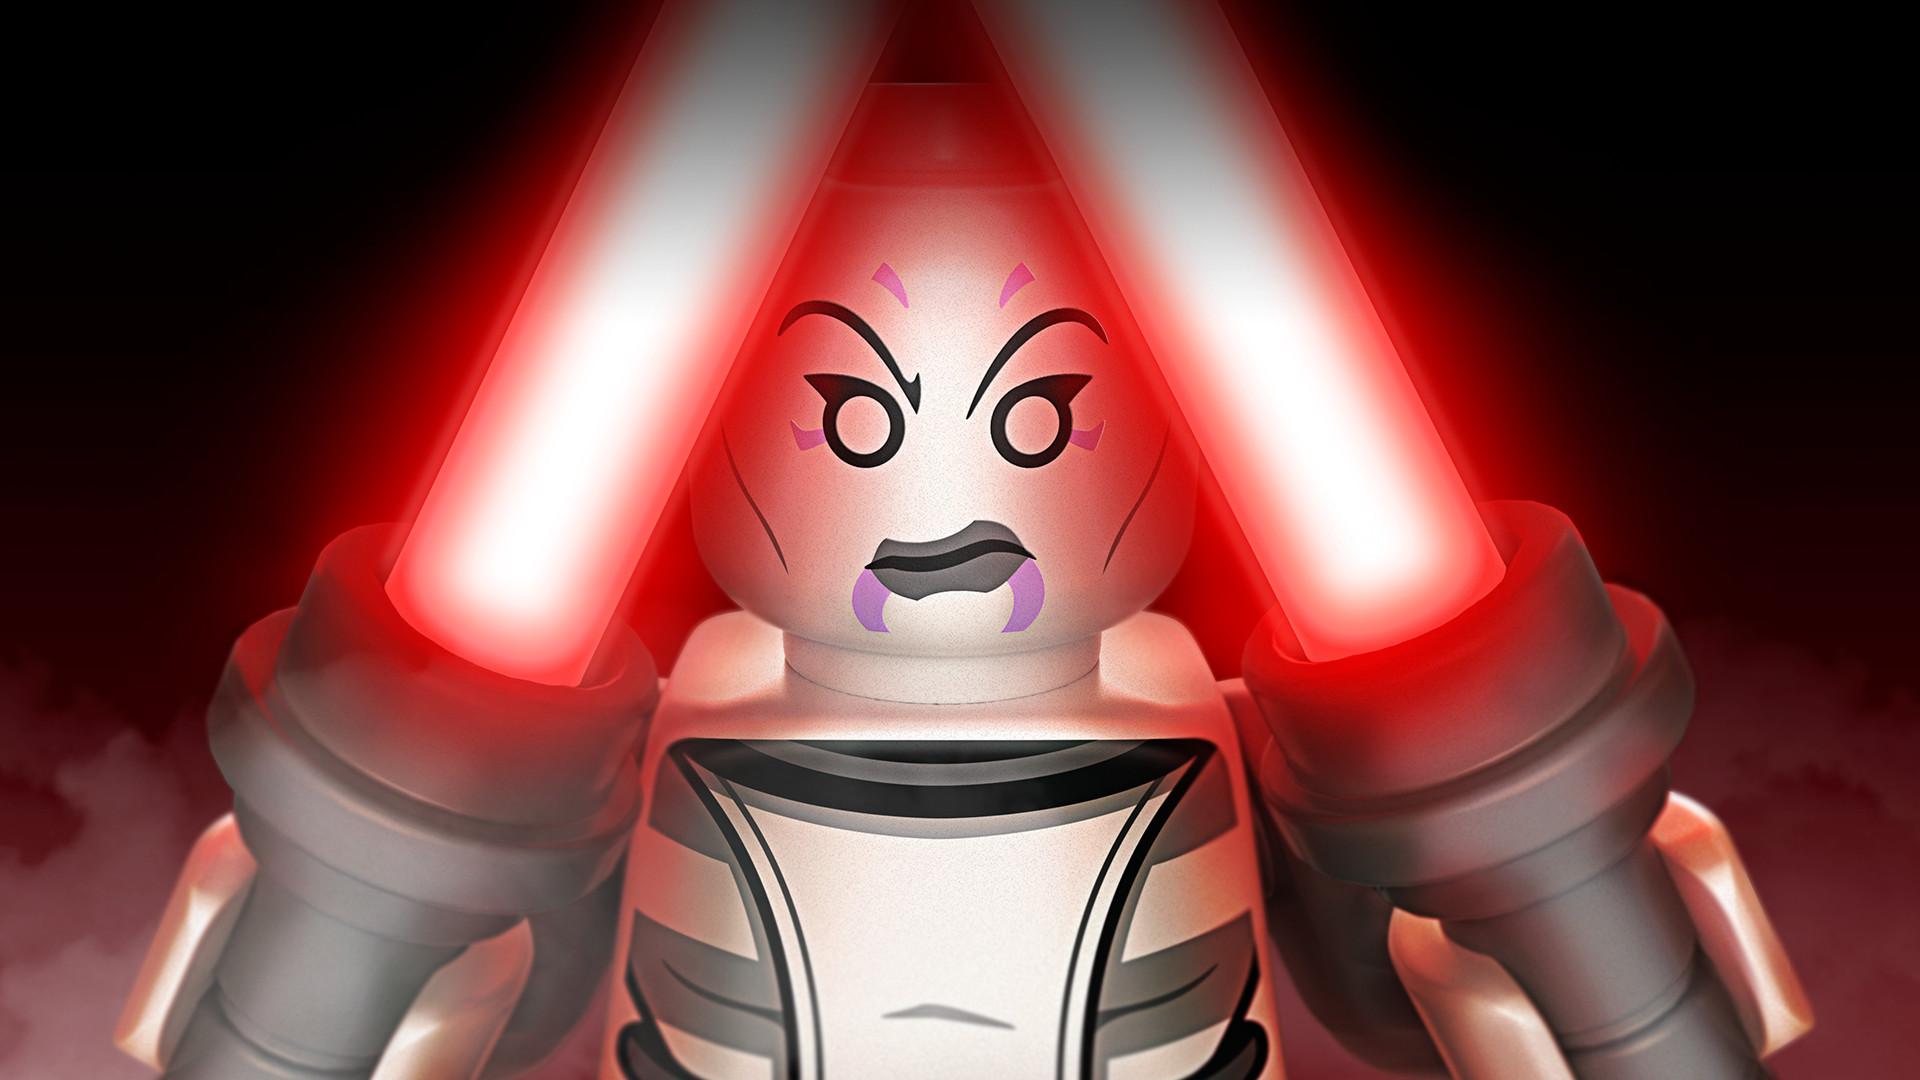 LEGO Star Wars: The Force Awakens - The Clone Wars Character Pack DLC Steam CD Key